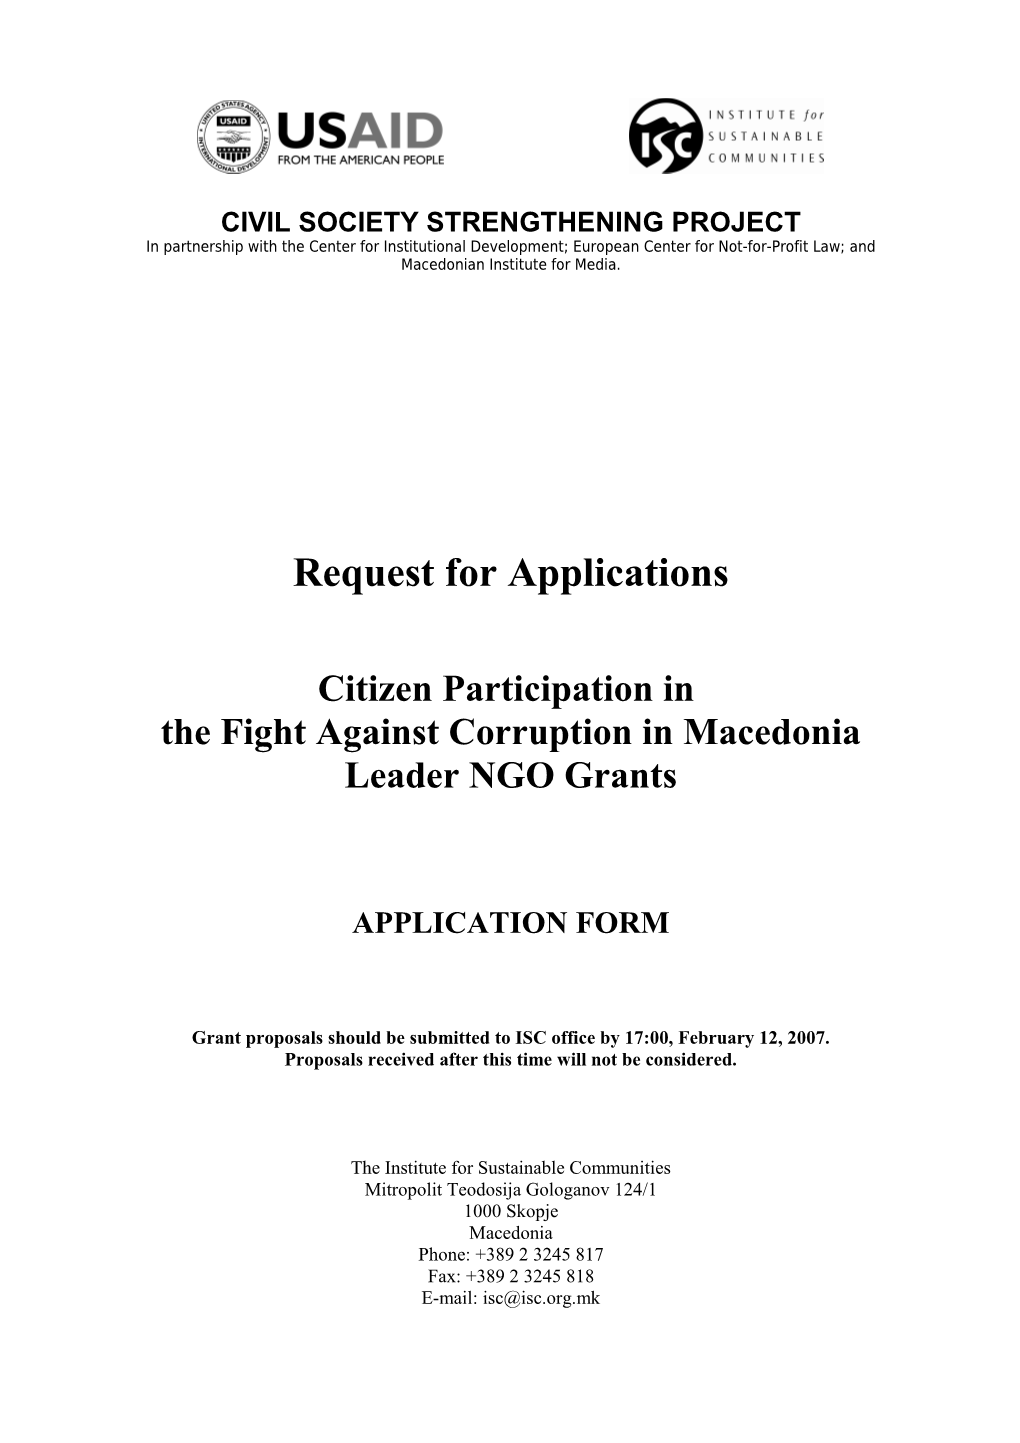 Request for Applications for Advocacy Partner Grants